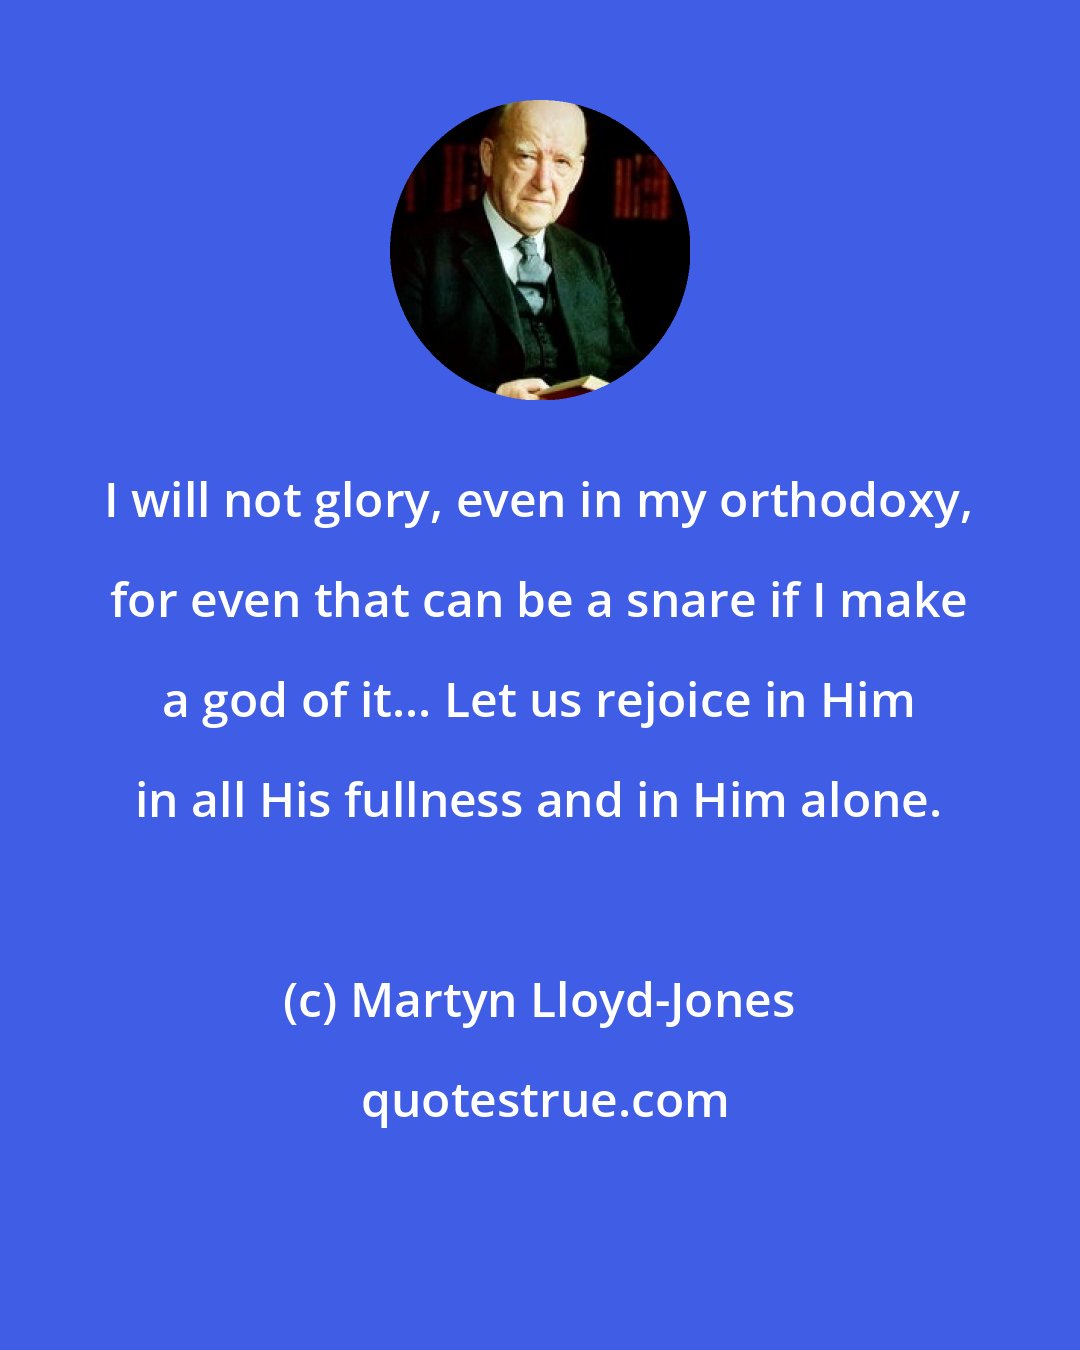 Martyn Lloyd-Jones: I will not glory, even in my orthodoxy, for even that can be a snare if I make a god of it... Let us rejoice in Him in all His fullness and in Him alone.